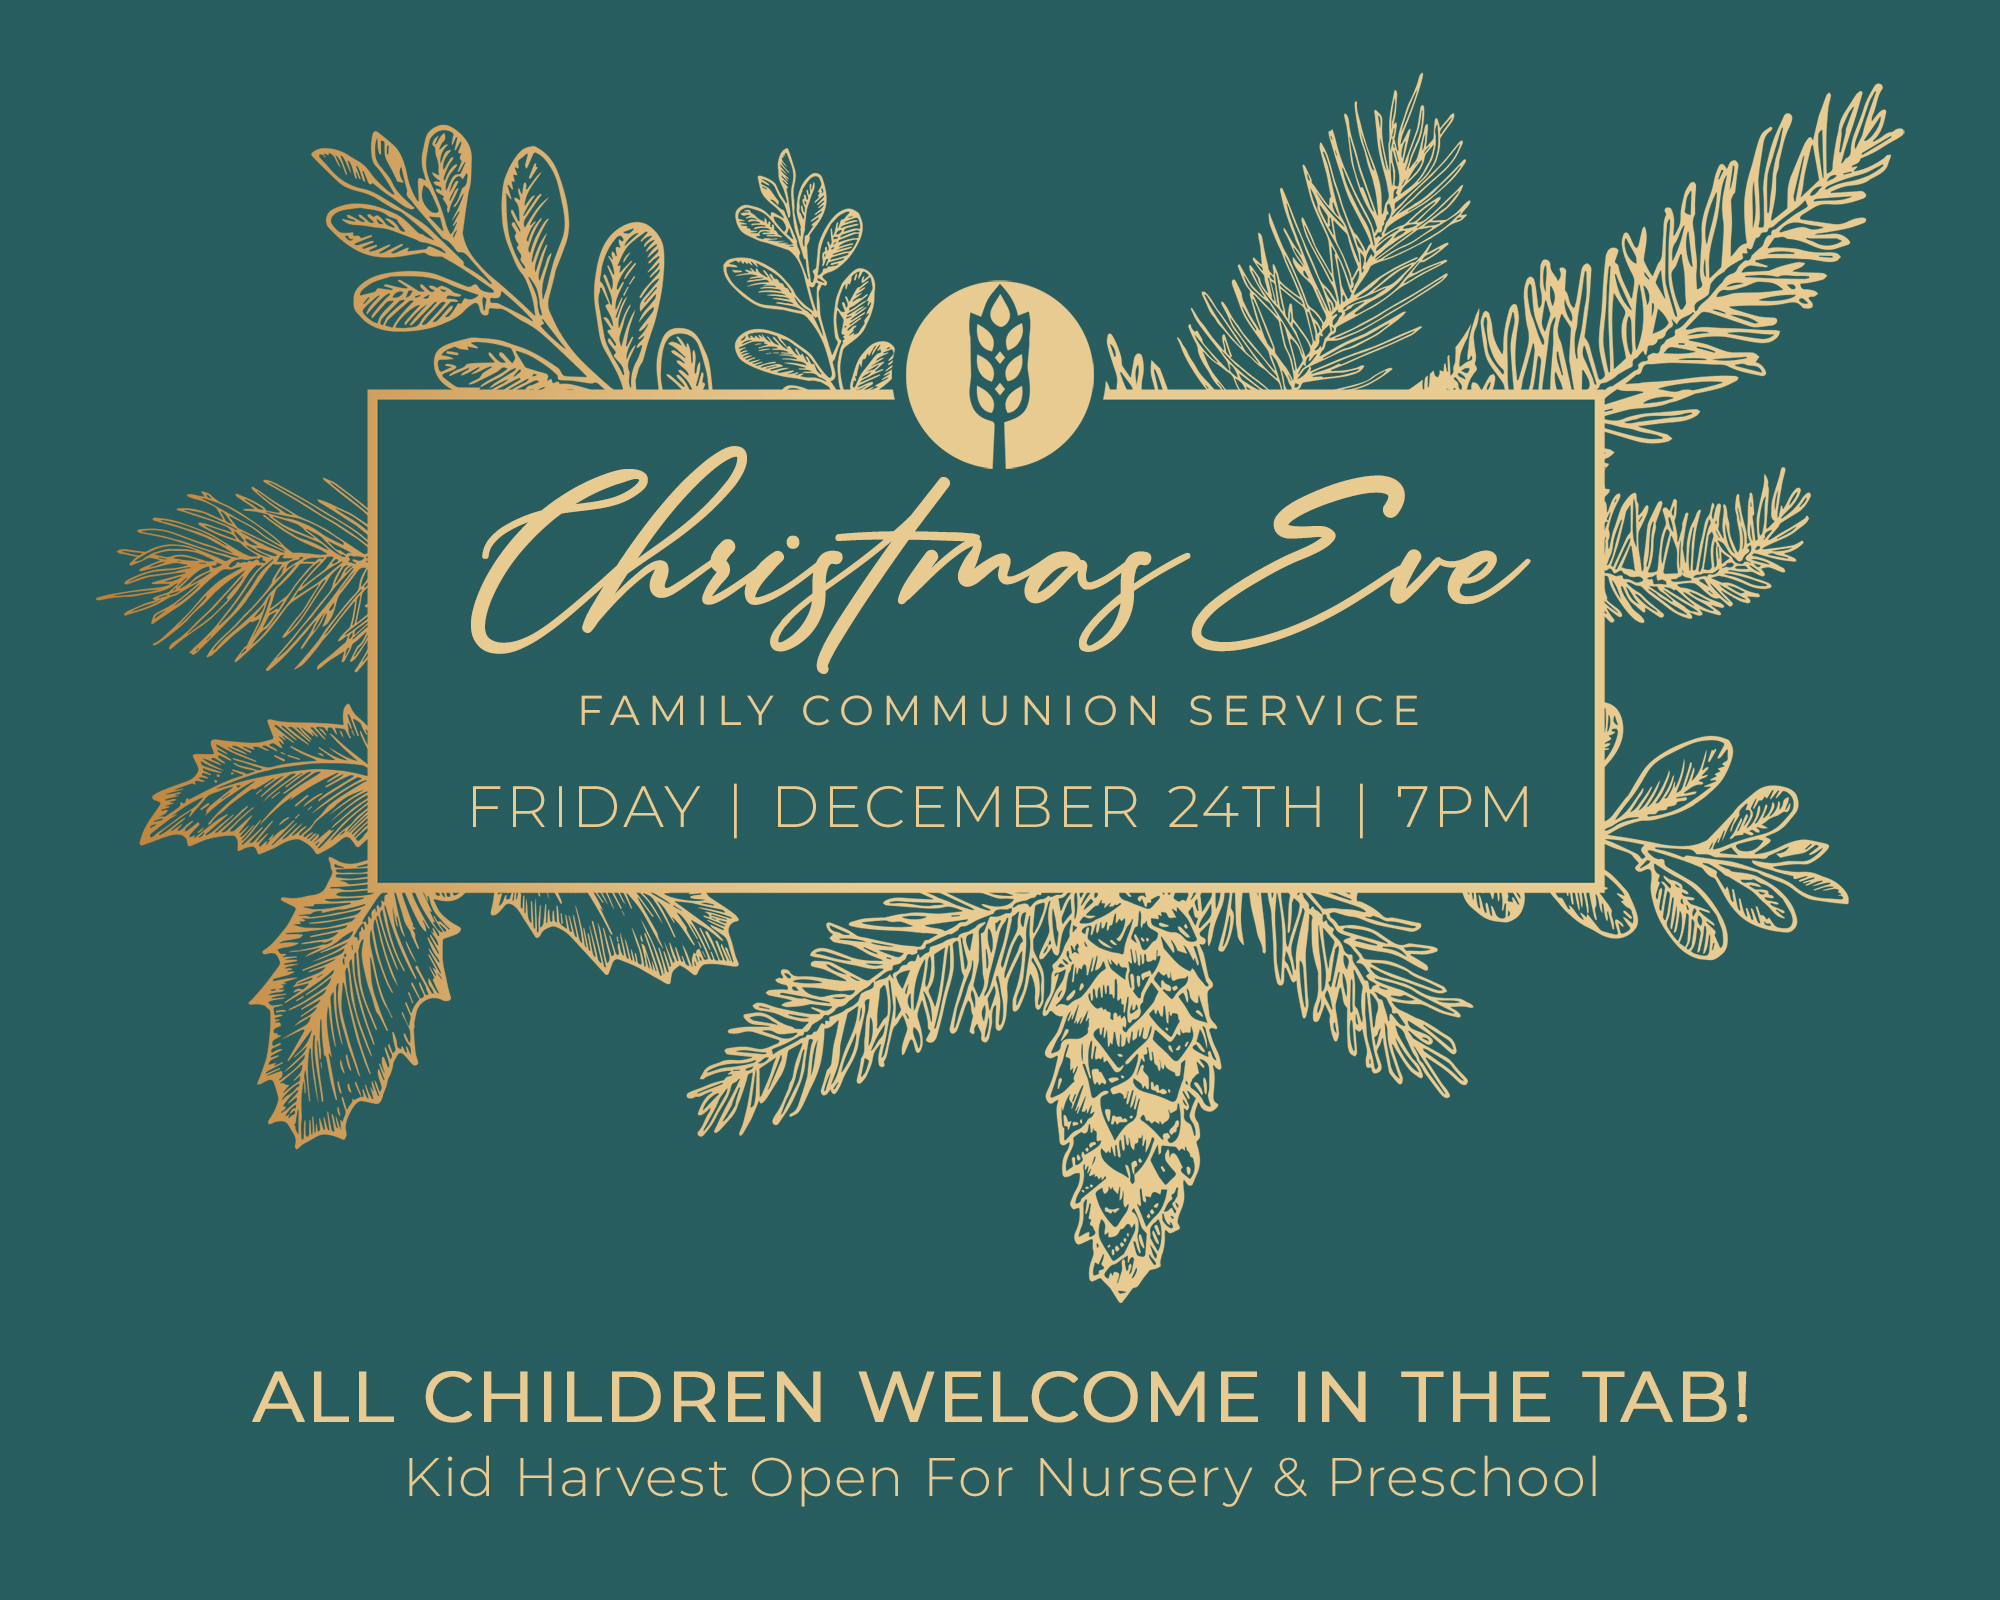 Christmas Eve Family Communion Service Friday, December 24th, 7pm All Children Welcome in the Tab! Kid Harvest Open for Nursery and Preschool